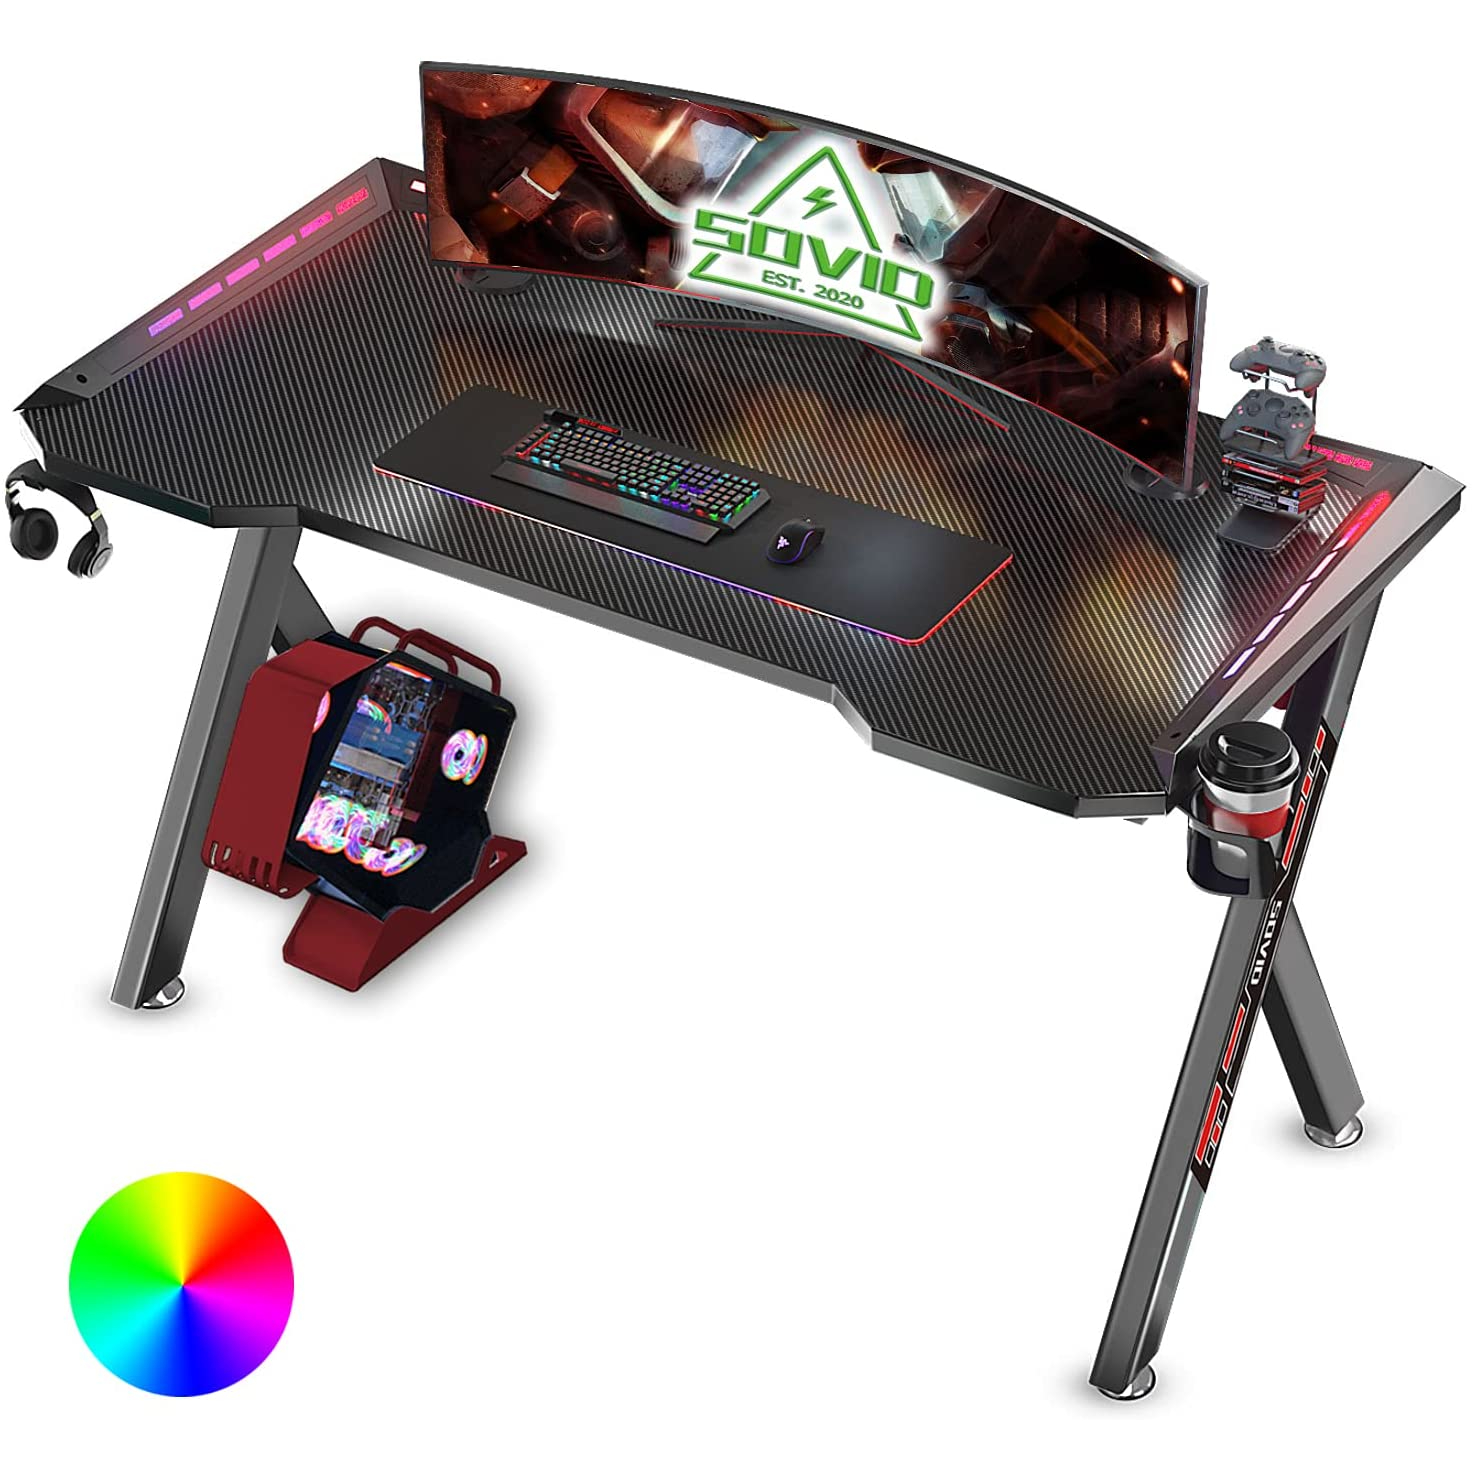 SOViD Gaming Table 47 Inch PC Computer Desk W/ LED RGB